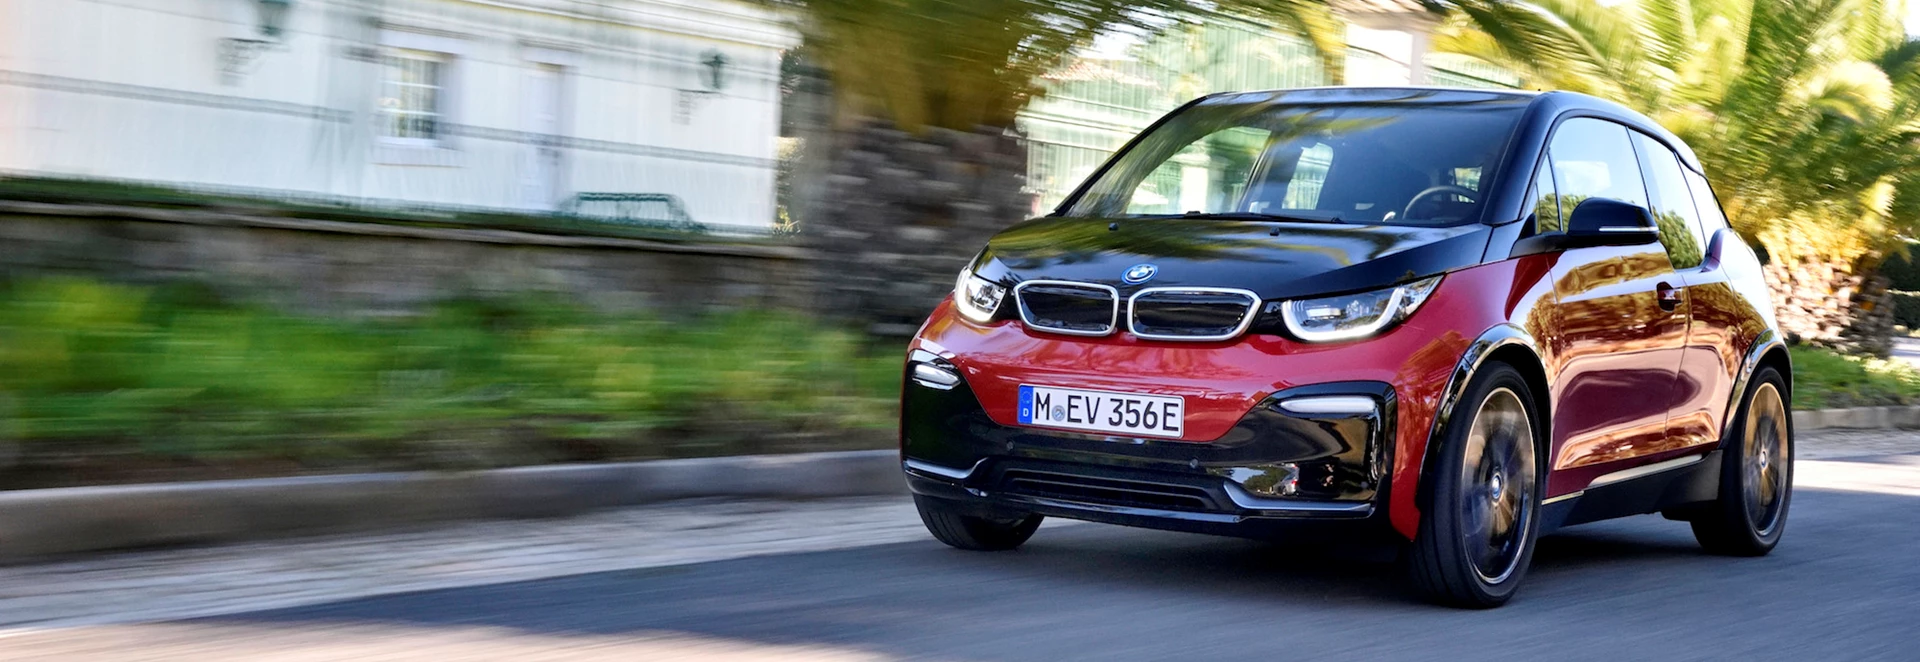 2018 BMW i3s all-electric hatchback review